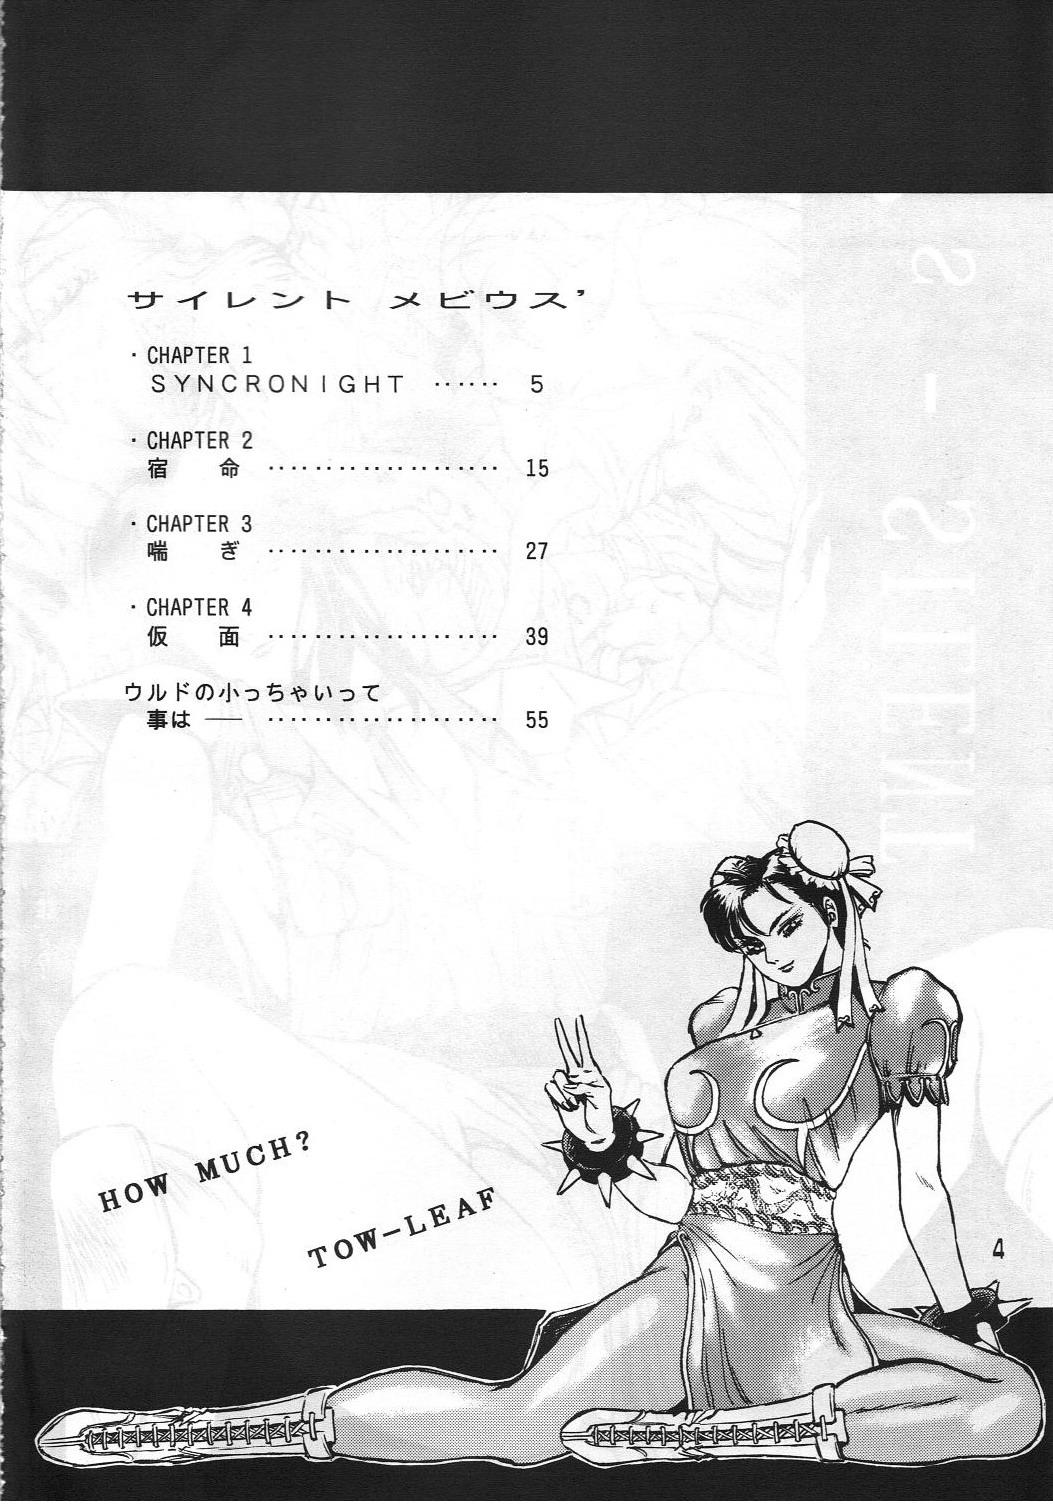 Culito C's SILENT - Ah my goddess Maison ikkoku Silent mobius Glamour - Page 3